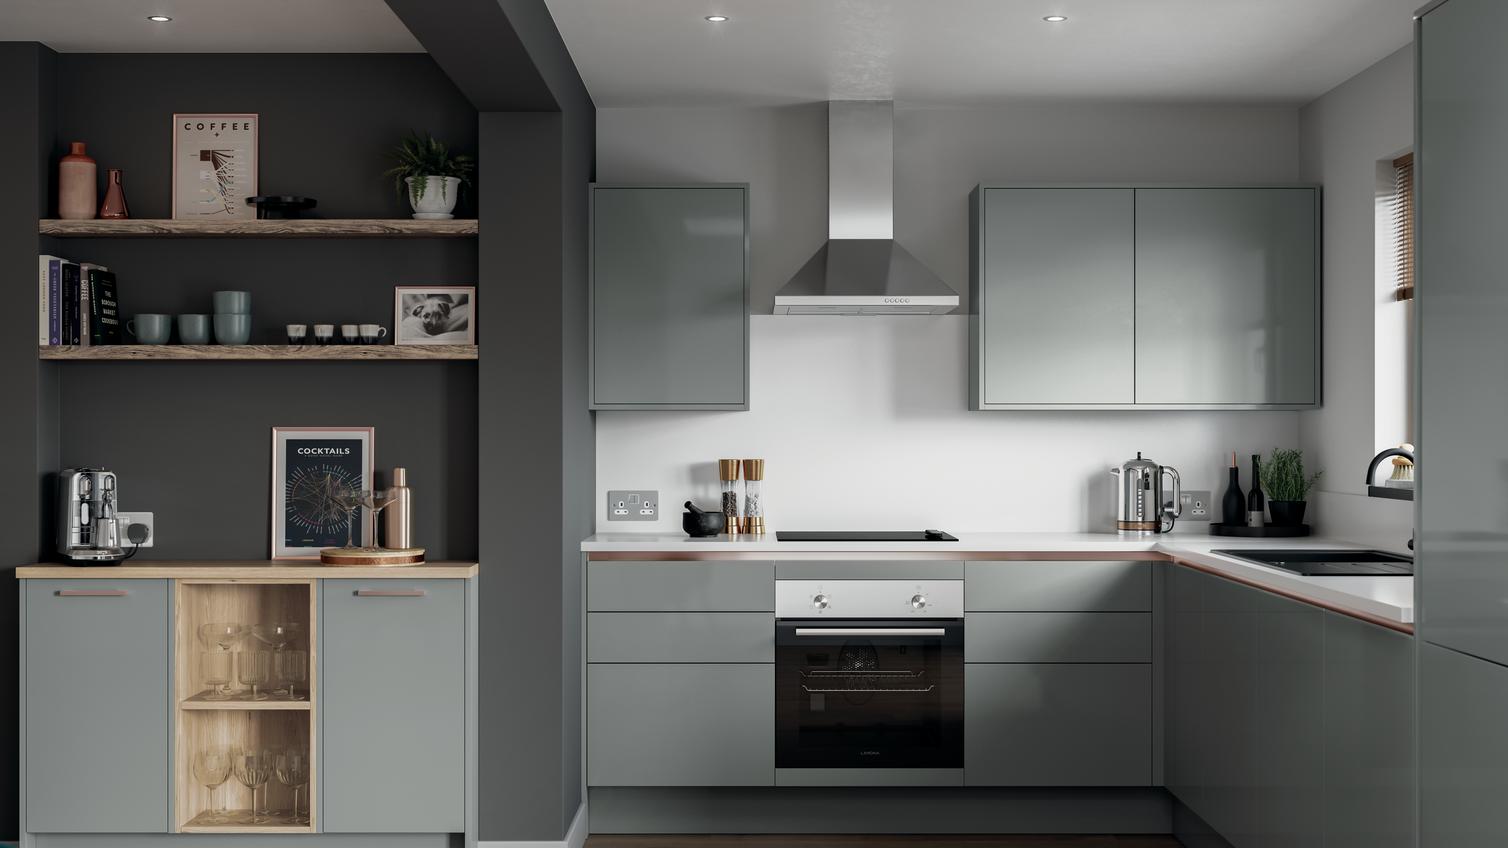 Small l-shape kitchen with grey slab doors and copper trims for a handleless look. Has a single oven and a silver extractor.